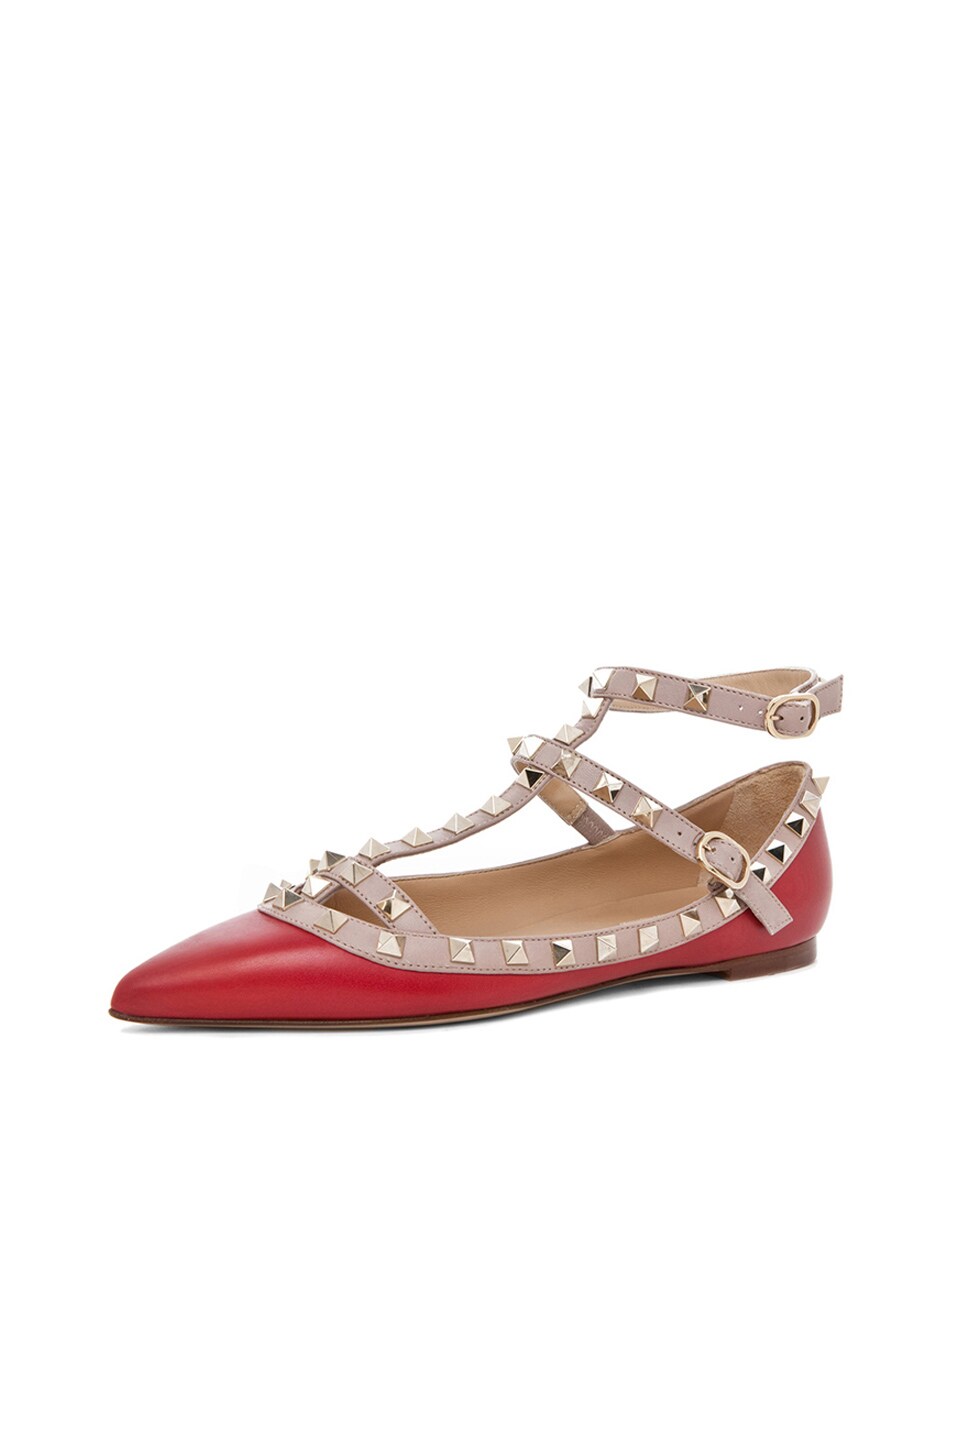 Valentino Rockstud Leather Cage Flats in Red | FWRD